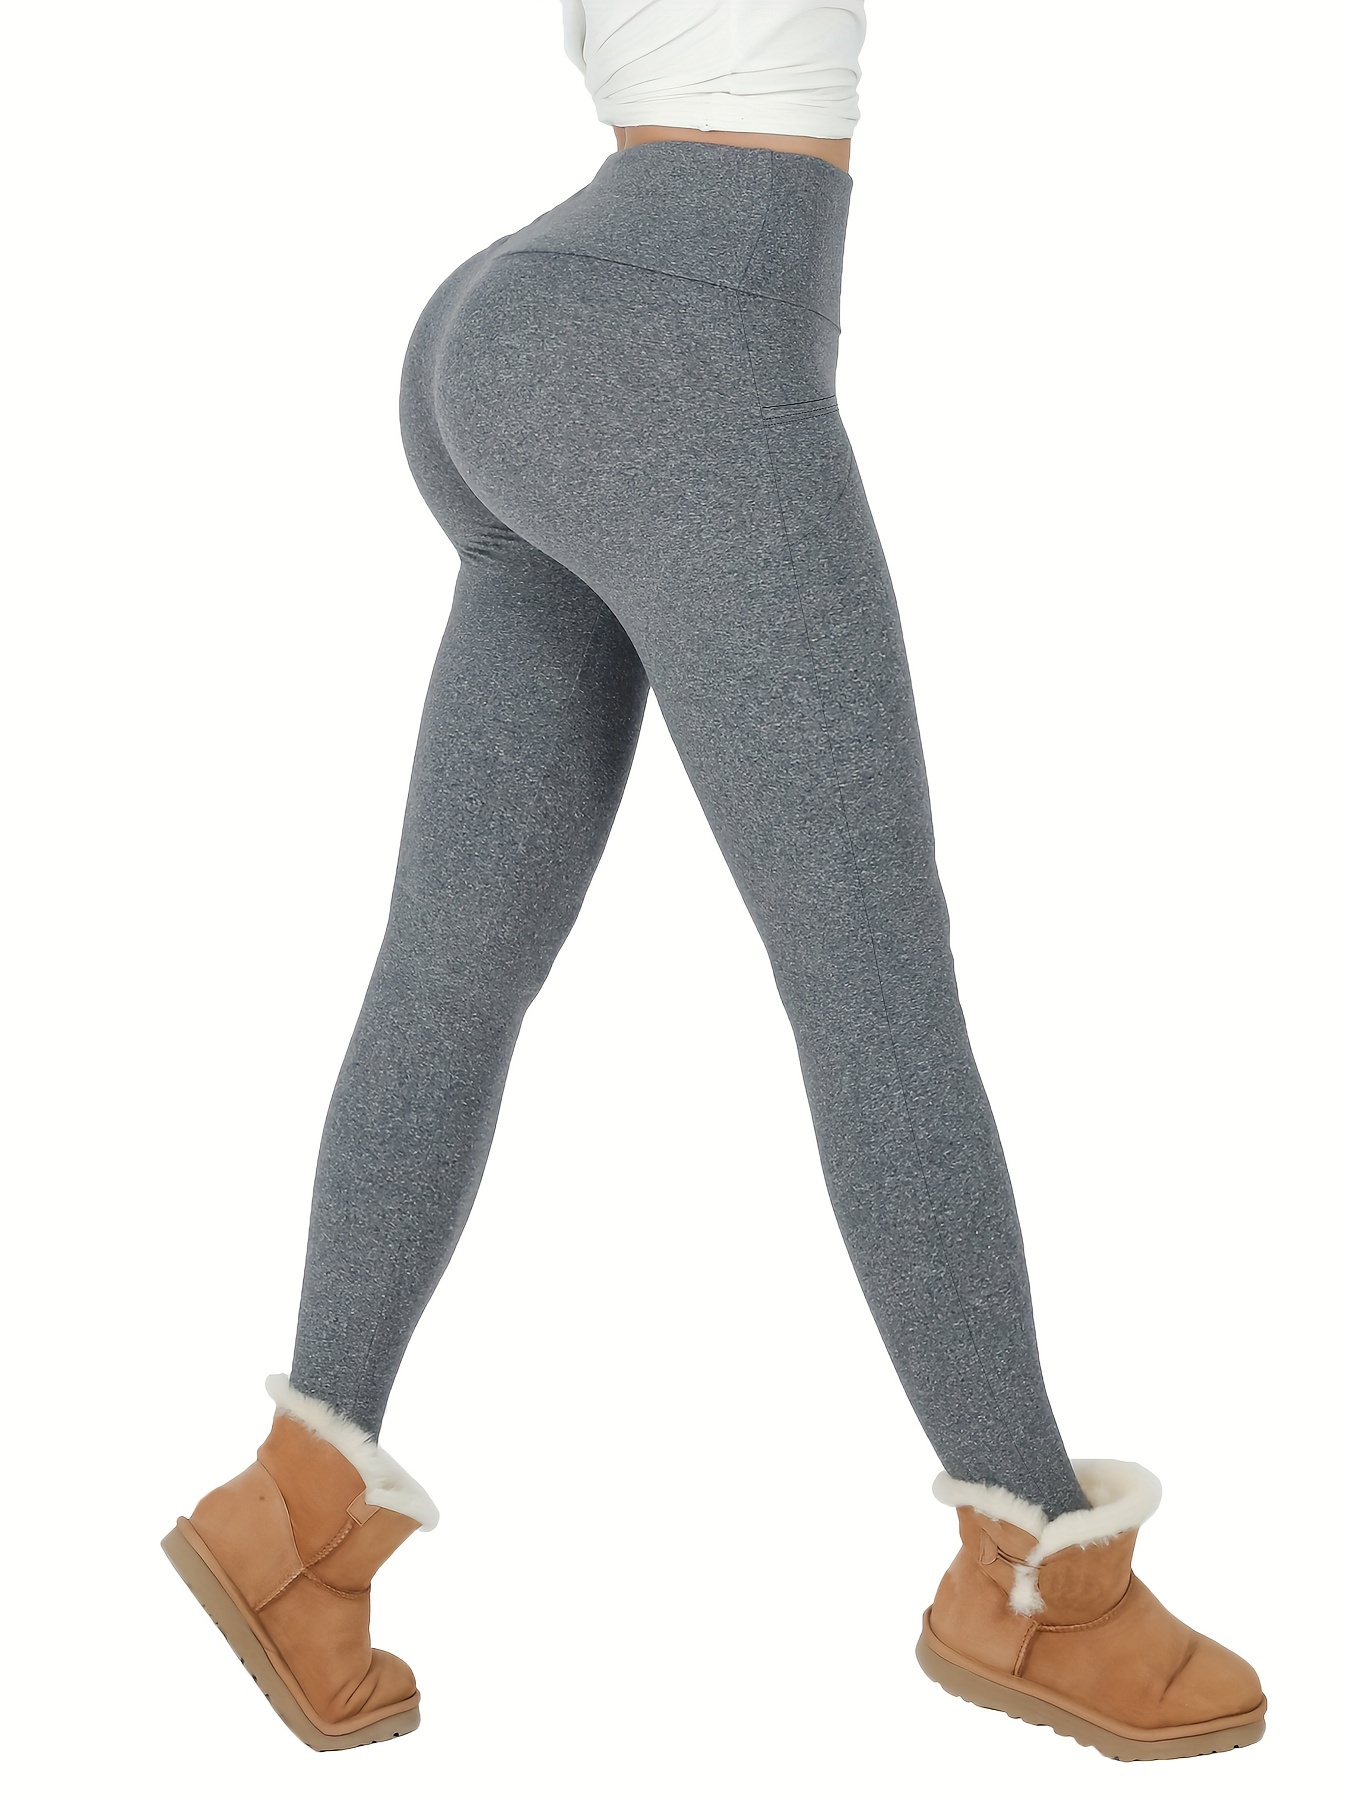 JOYSPELS Thermal Leggings Women with Pockets, High Waisted Winter Warm  Thick Fleece Lined Yoga Pants Gym Workout Fitness Running Full Length Tights